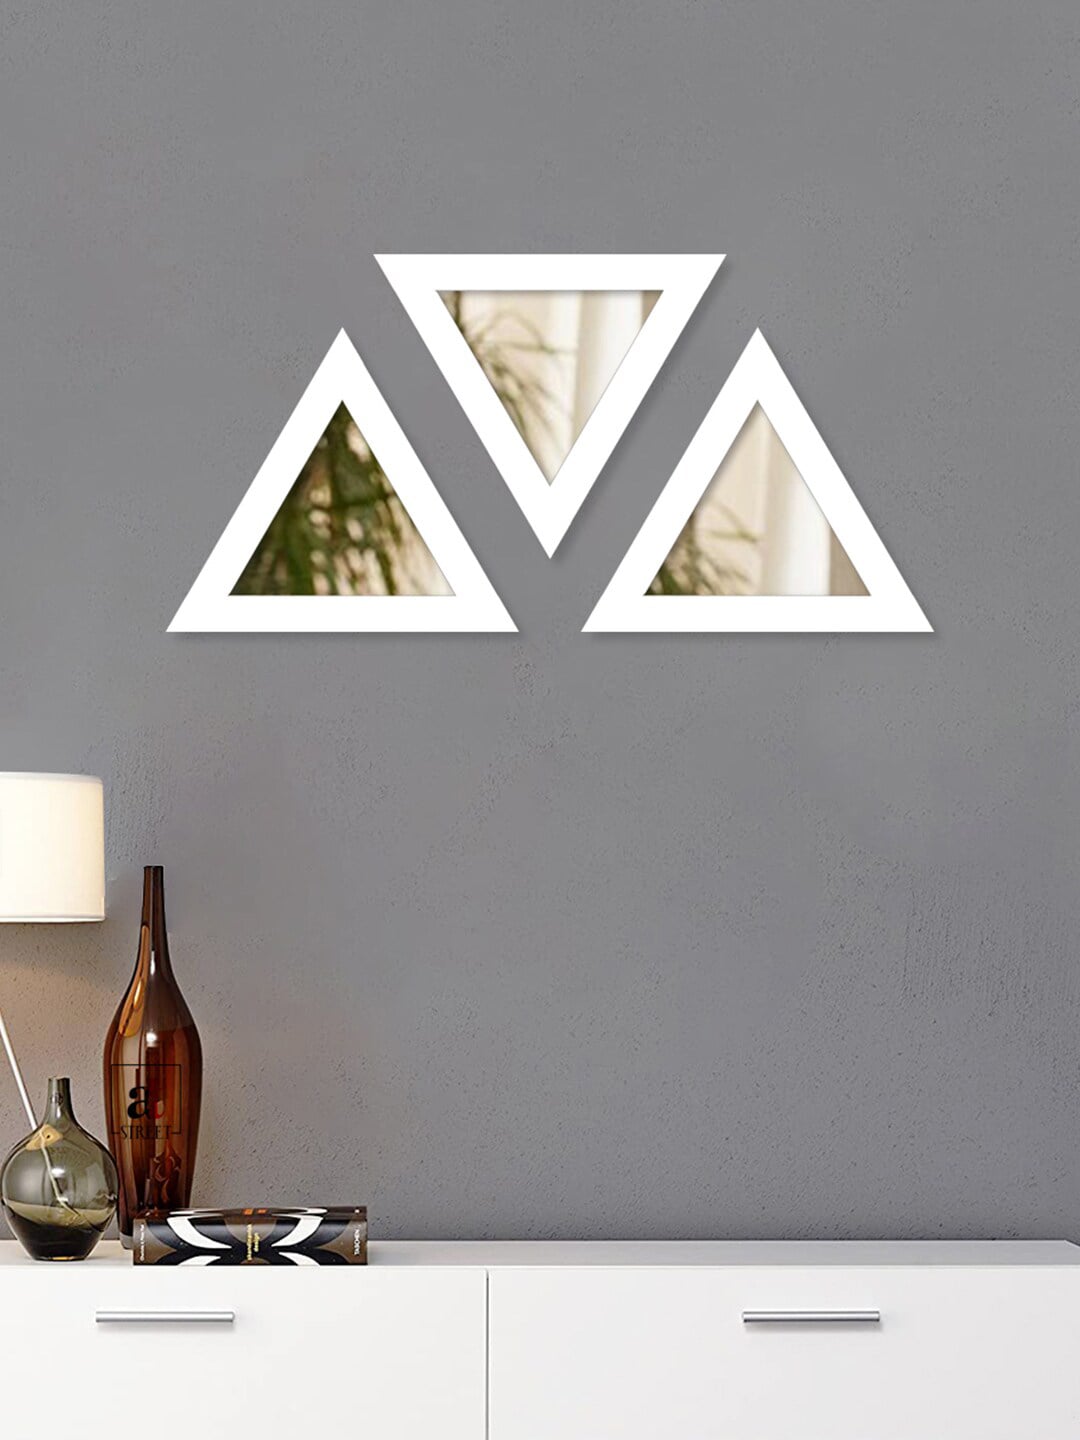 Art Street Set Of 3 White Triangle Shaped Decorative Wall Mirrors Price in India